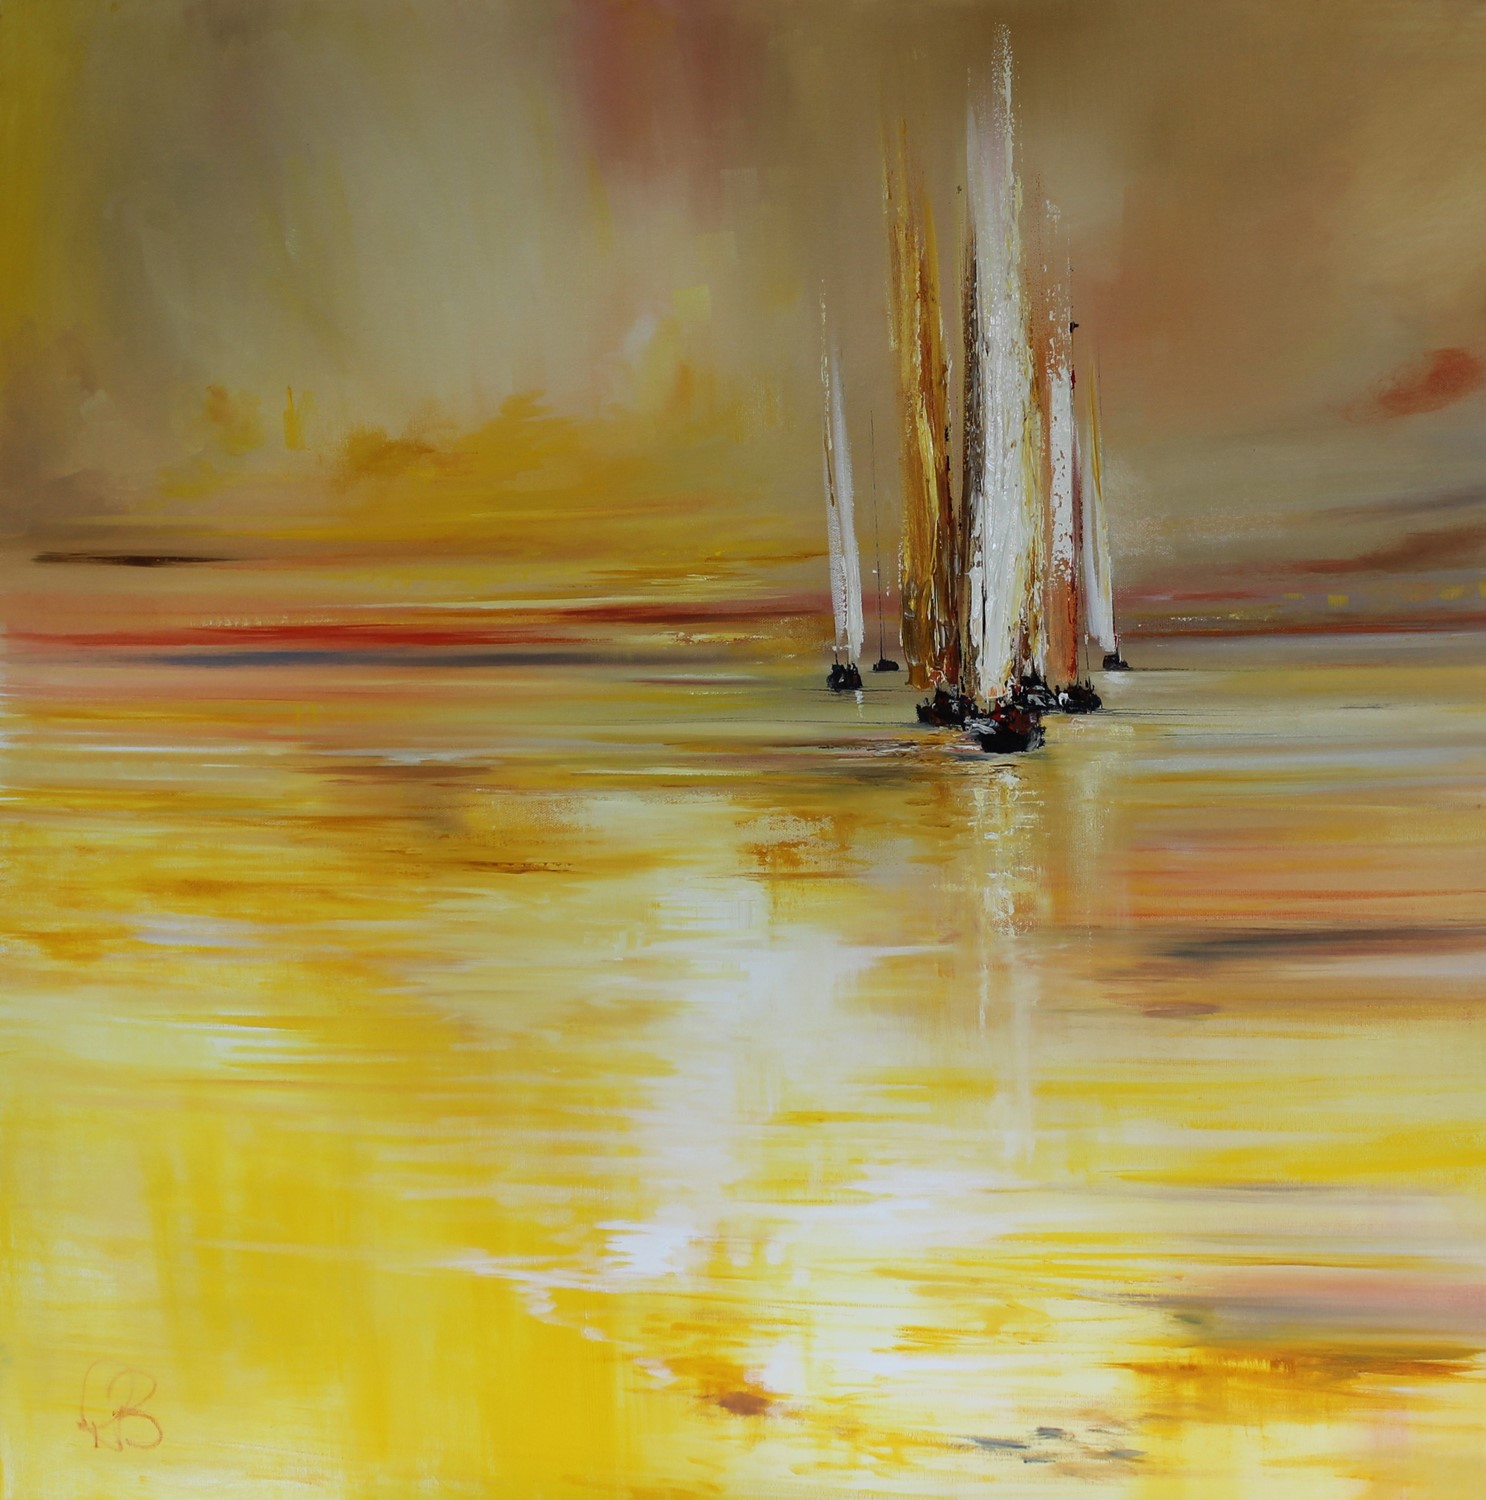 'Yachts and glowing light' by artist Rosanne Barr